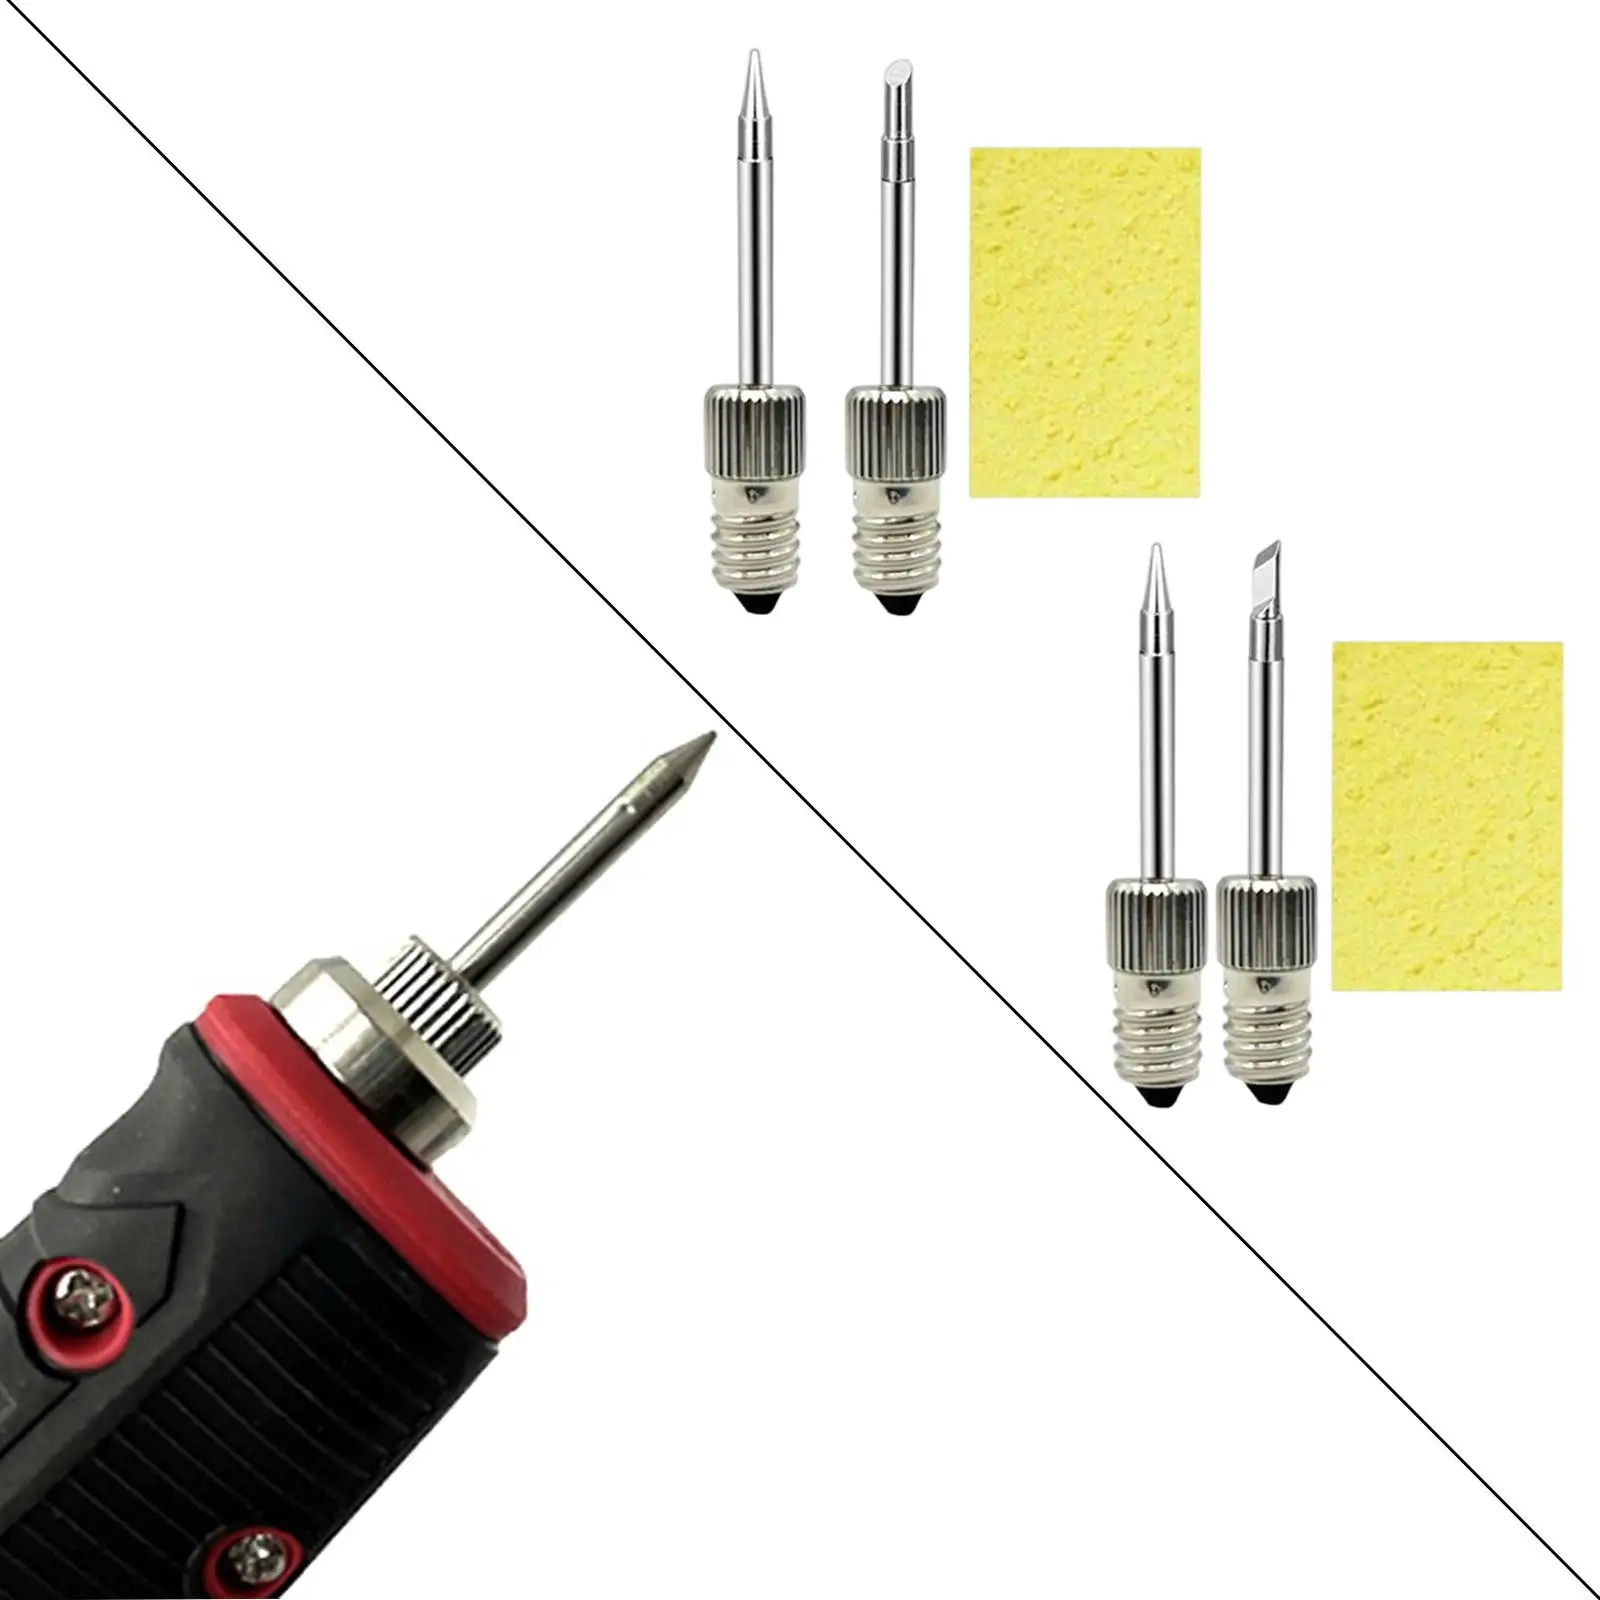 Copper Soldering Iron Tips Kit Soldering Iron Tips Accessories Parts Welding Soldering Tips for E10 Interface Soldering Station